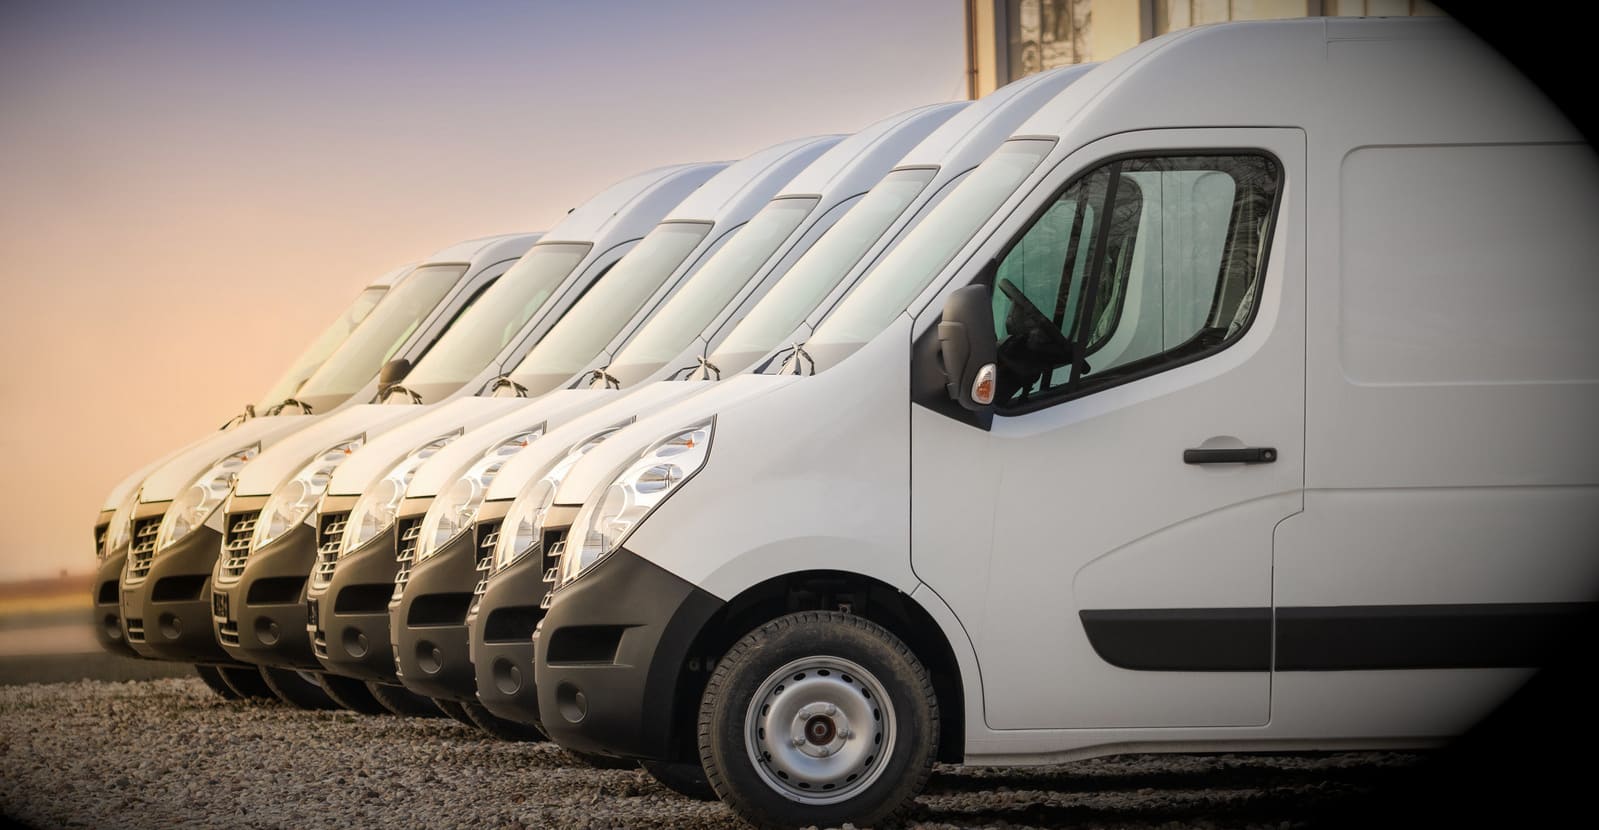 HIRE A COMMERCIAL VEHICLE: SPRINTER AND VAN